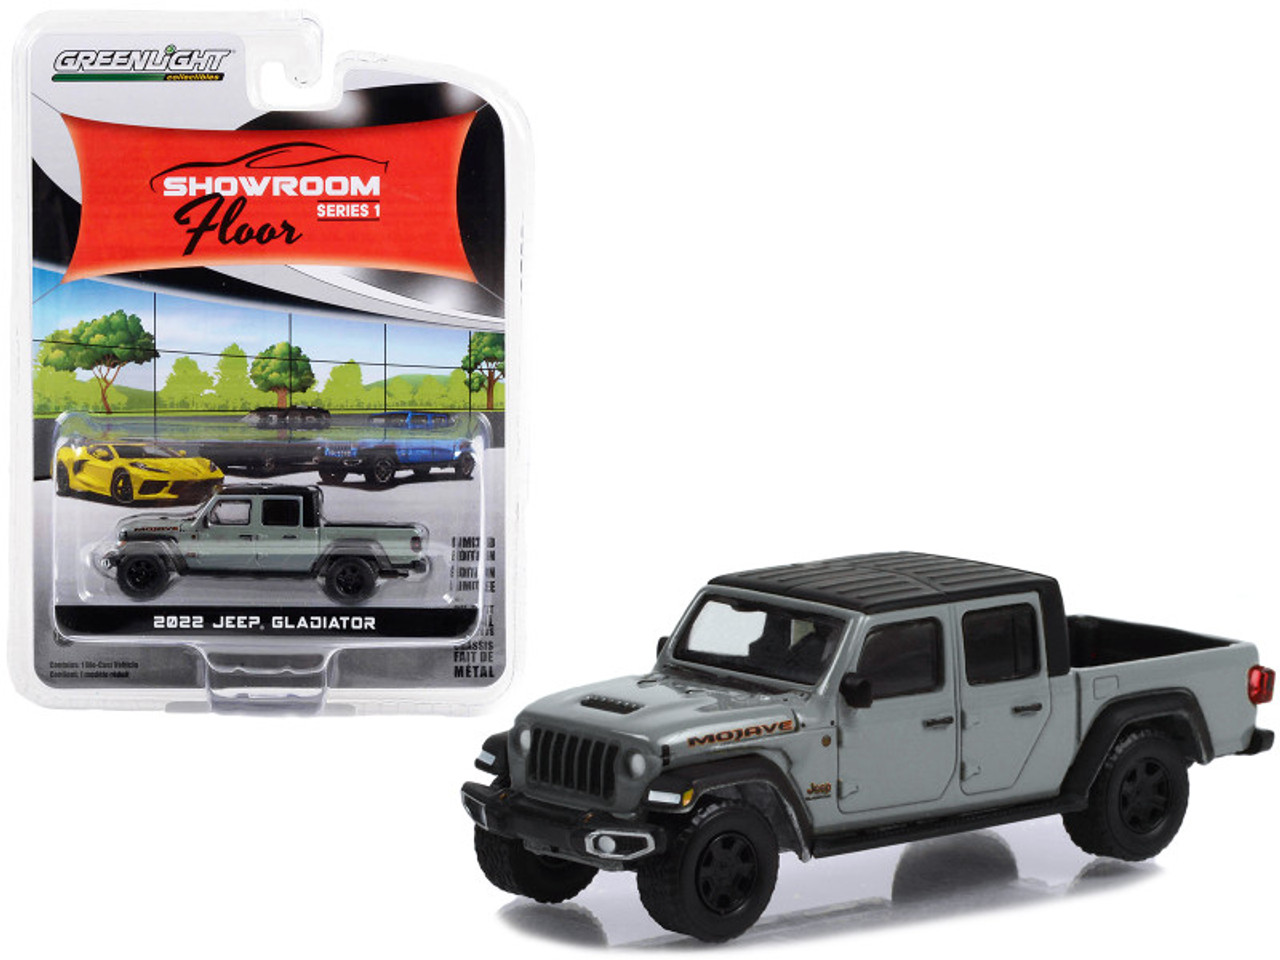 2022 Jeep Gladiator Mojave Pickup Truck Sting Gray with Black Top "Showroom Floor" Series 1 1/64 Diecast Model Car by Greenlight